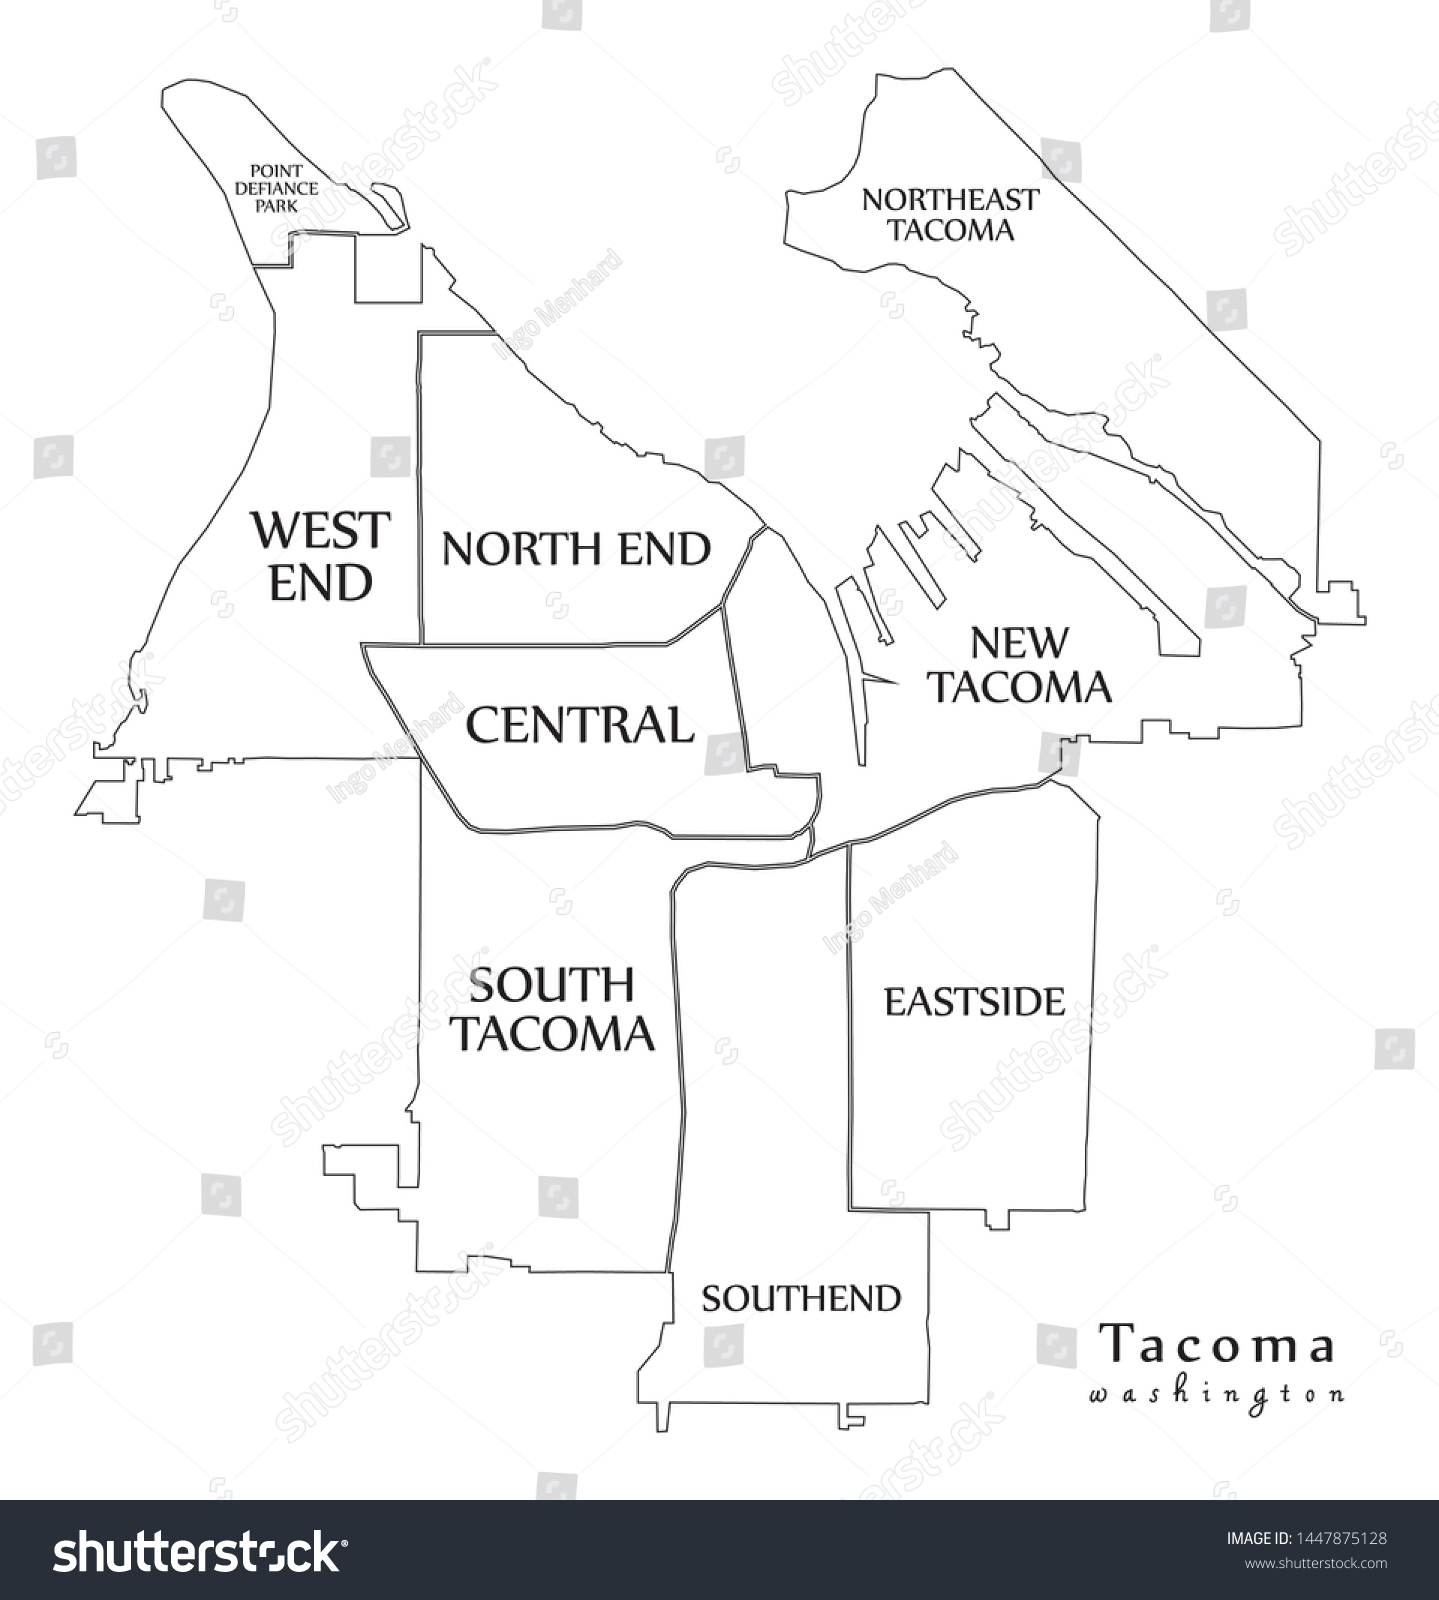 SVG of Modern City Map - Tacoma Washington city of the USA with neighborhoods and titles outline map svg